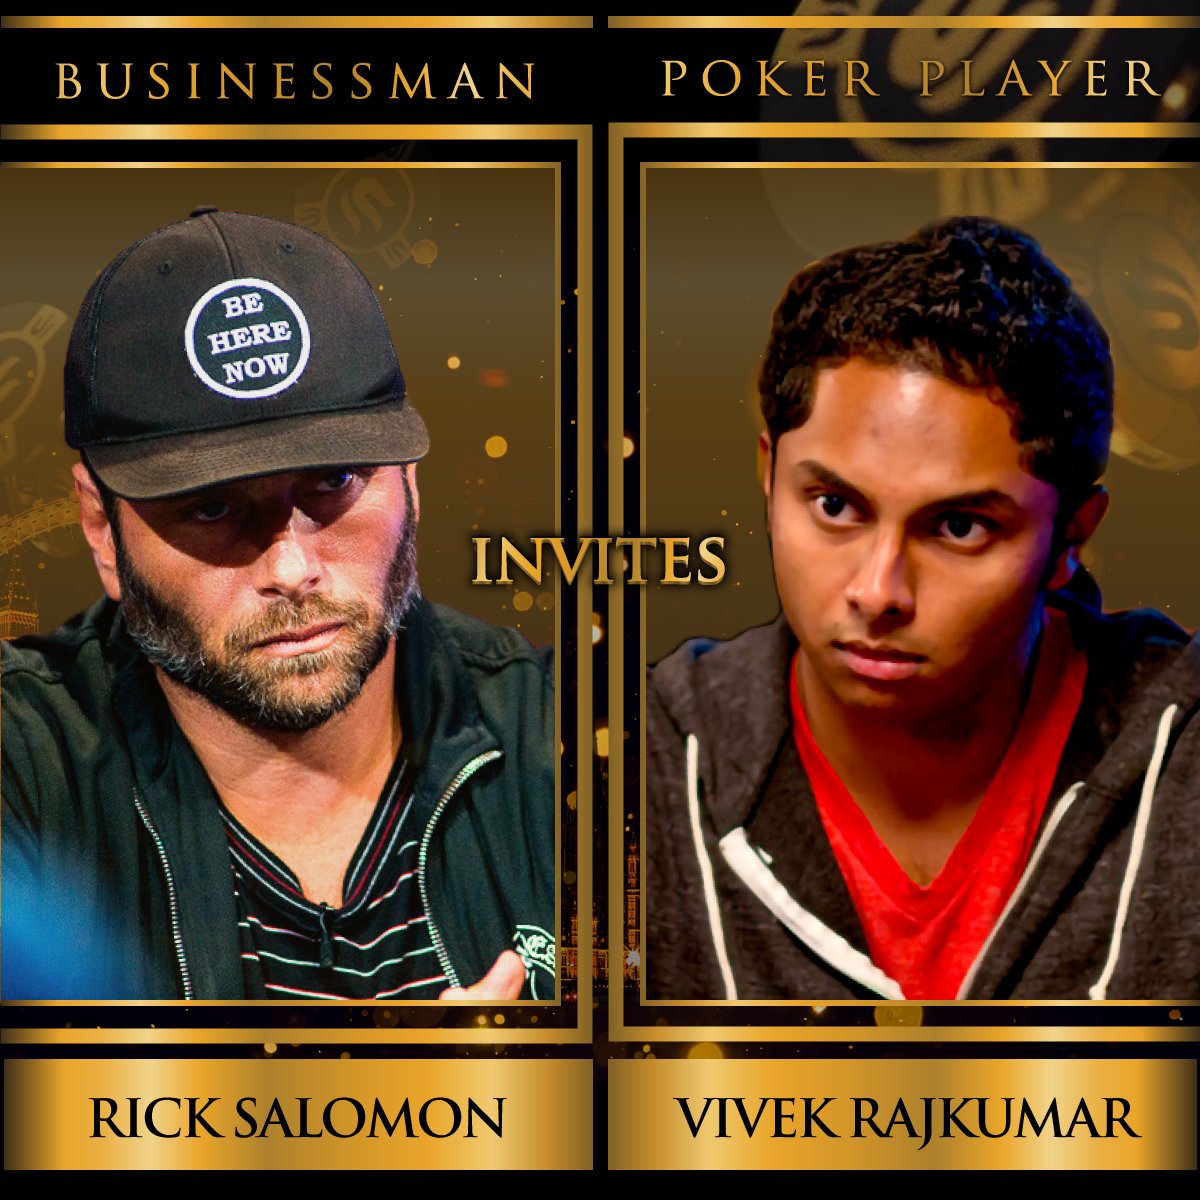 Triton Poker on Twitter: "📣 Rick Salomon has finally made his invite! Vivek Rajkumar 🇮🇳 joins the side as the 50th participant in the Triton Million for Charity. Only 1